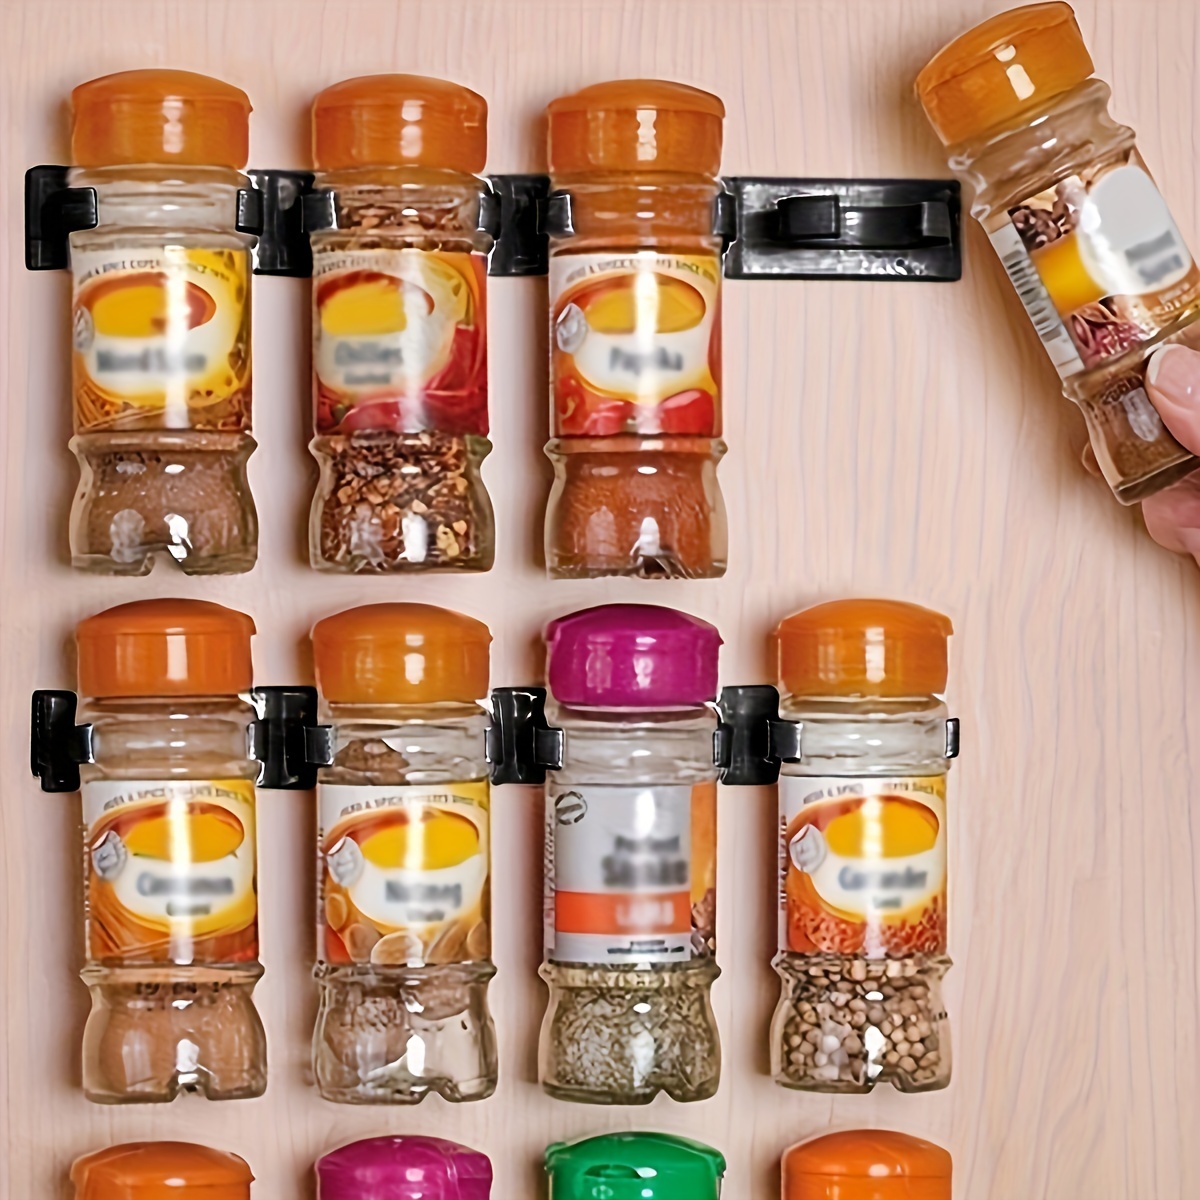 Spice Jars with Label 24Pcs, 4 oz Glass Jars with Bamboo Lids for Spice  Rack, Cabinet, Drawer, Spice Containers - 528 Spice Labels, Shaker Lids